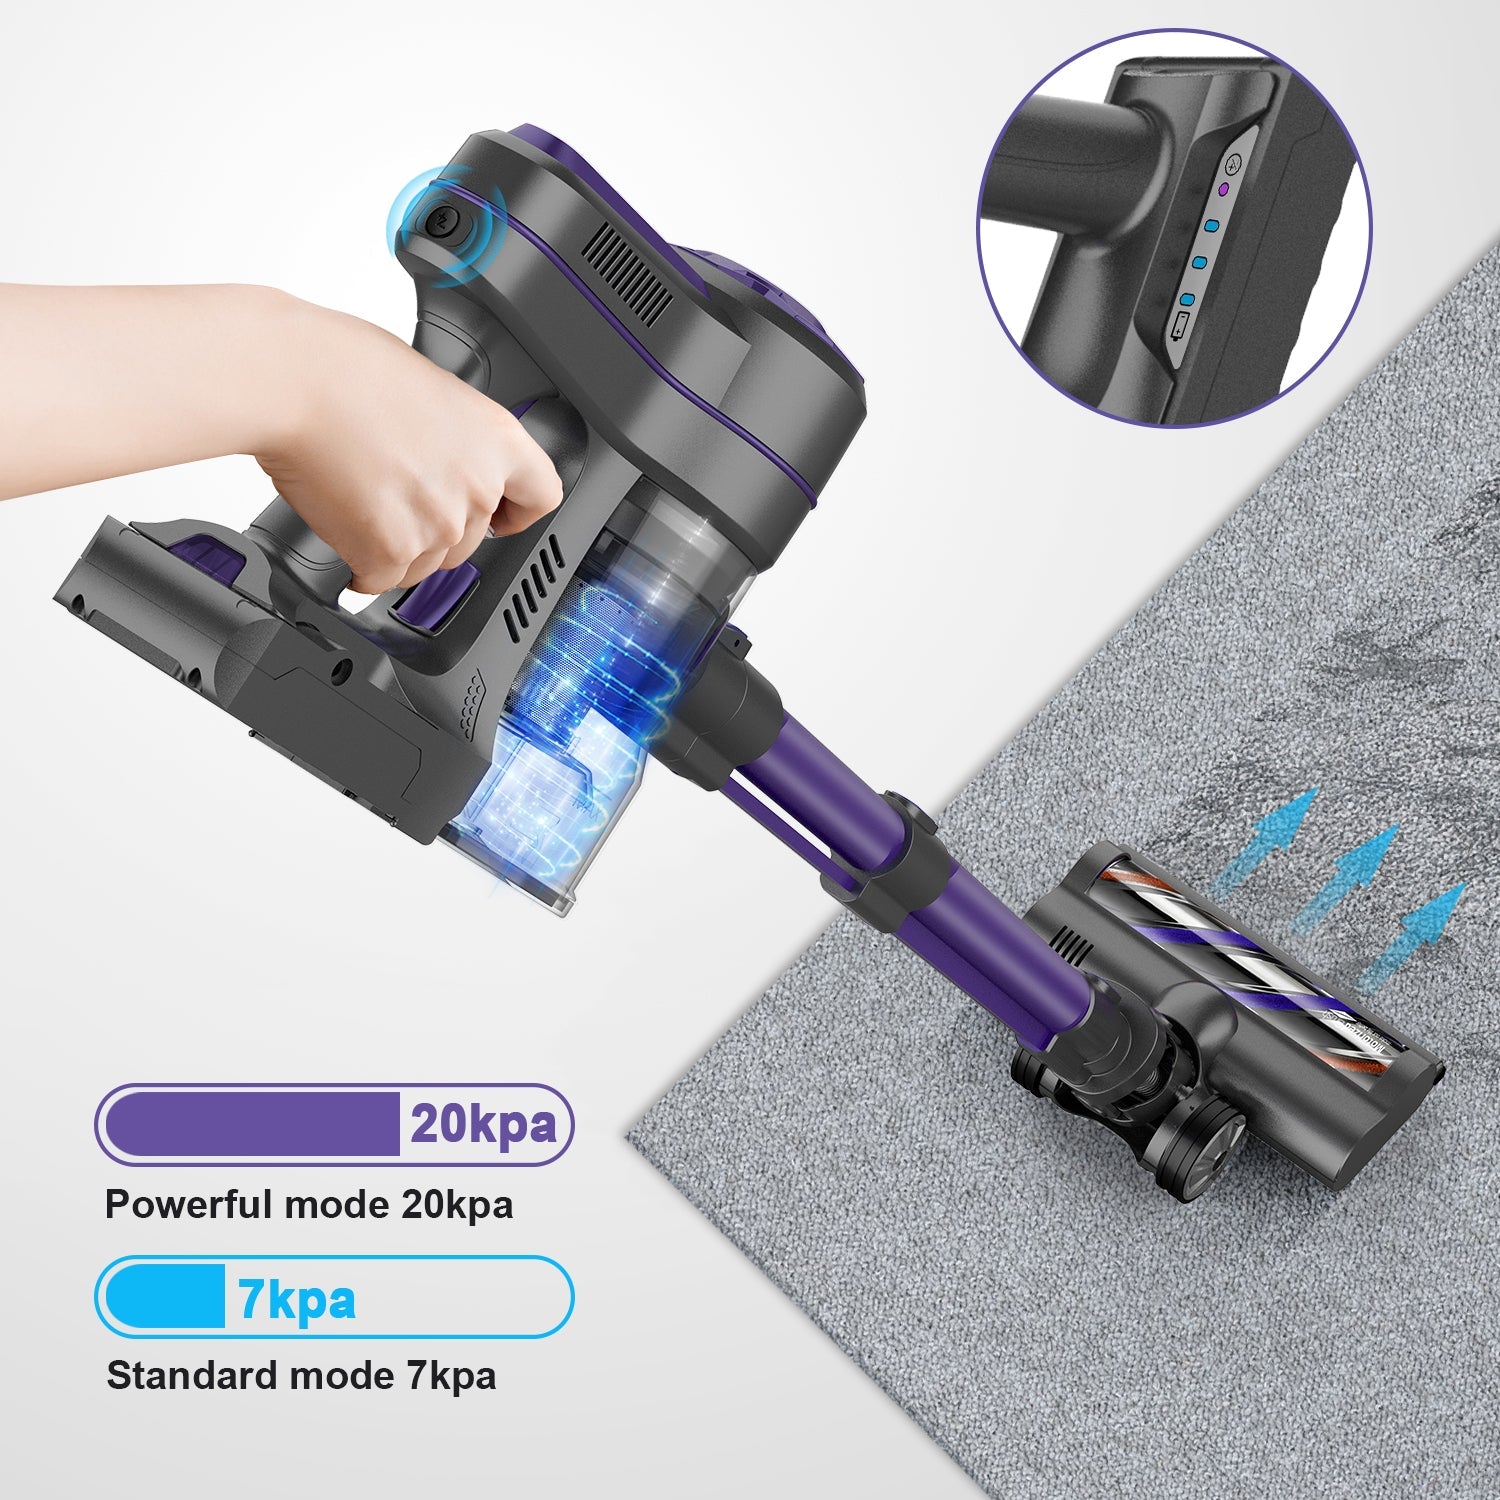 ONSON A10 Pro 20Kpa Super Suction Handheld Retractable Stick Wireless Vacuum Cleaner for floor Carpet Pet Hair baby magazin